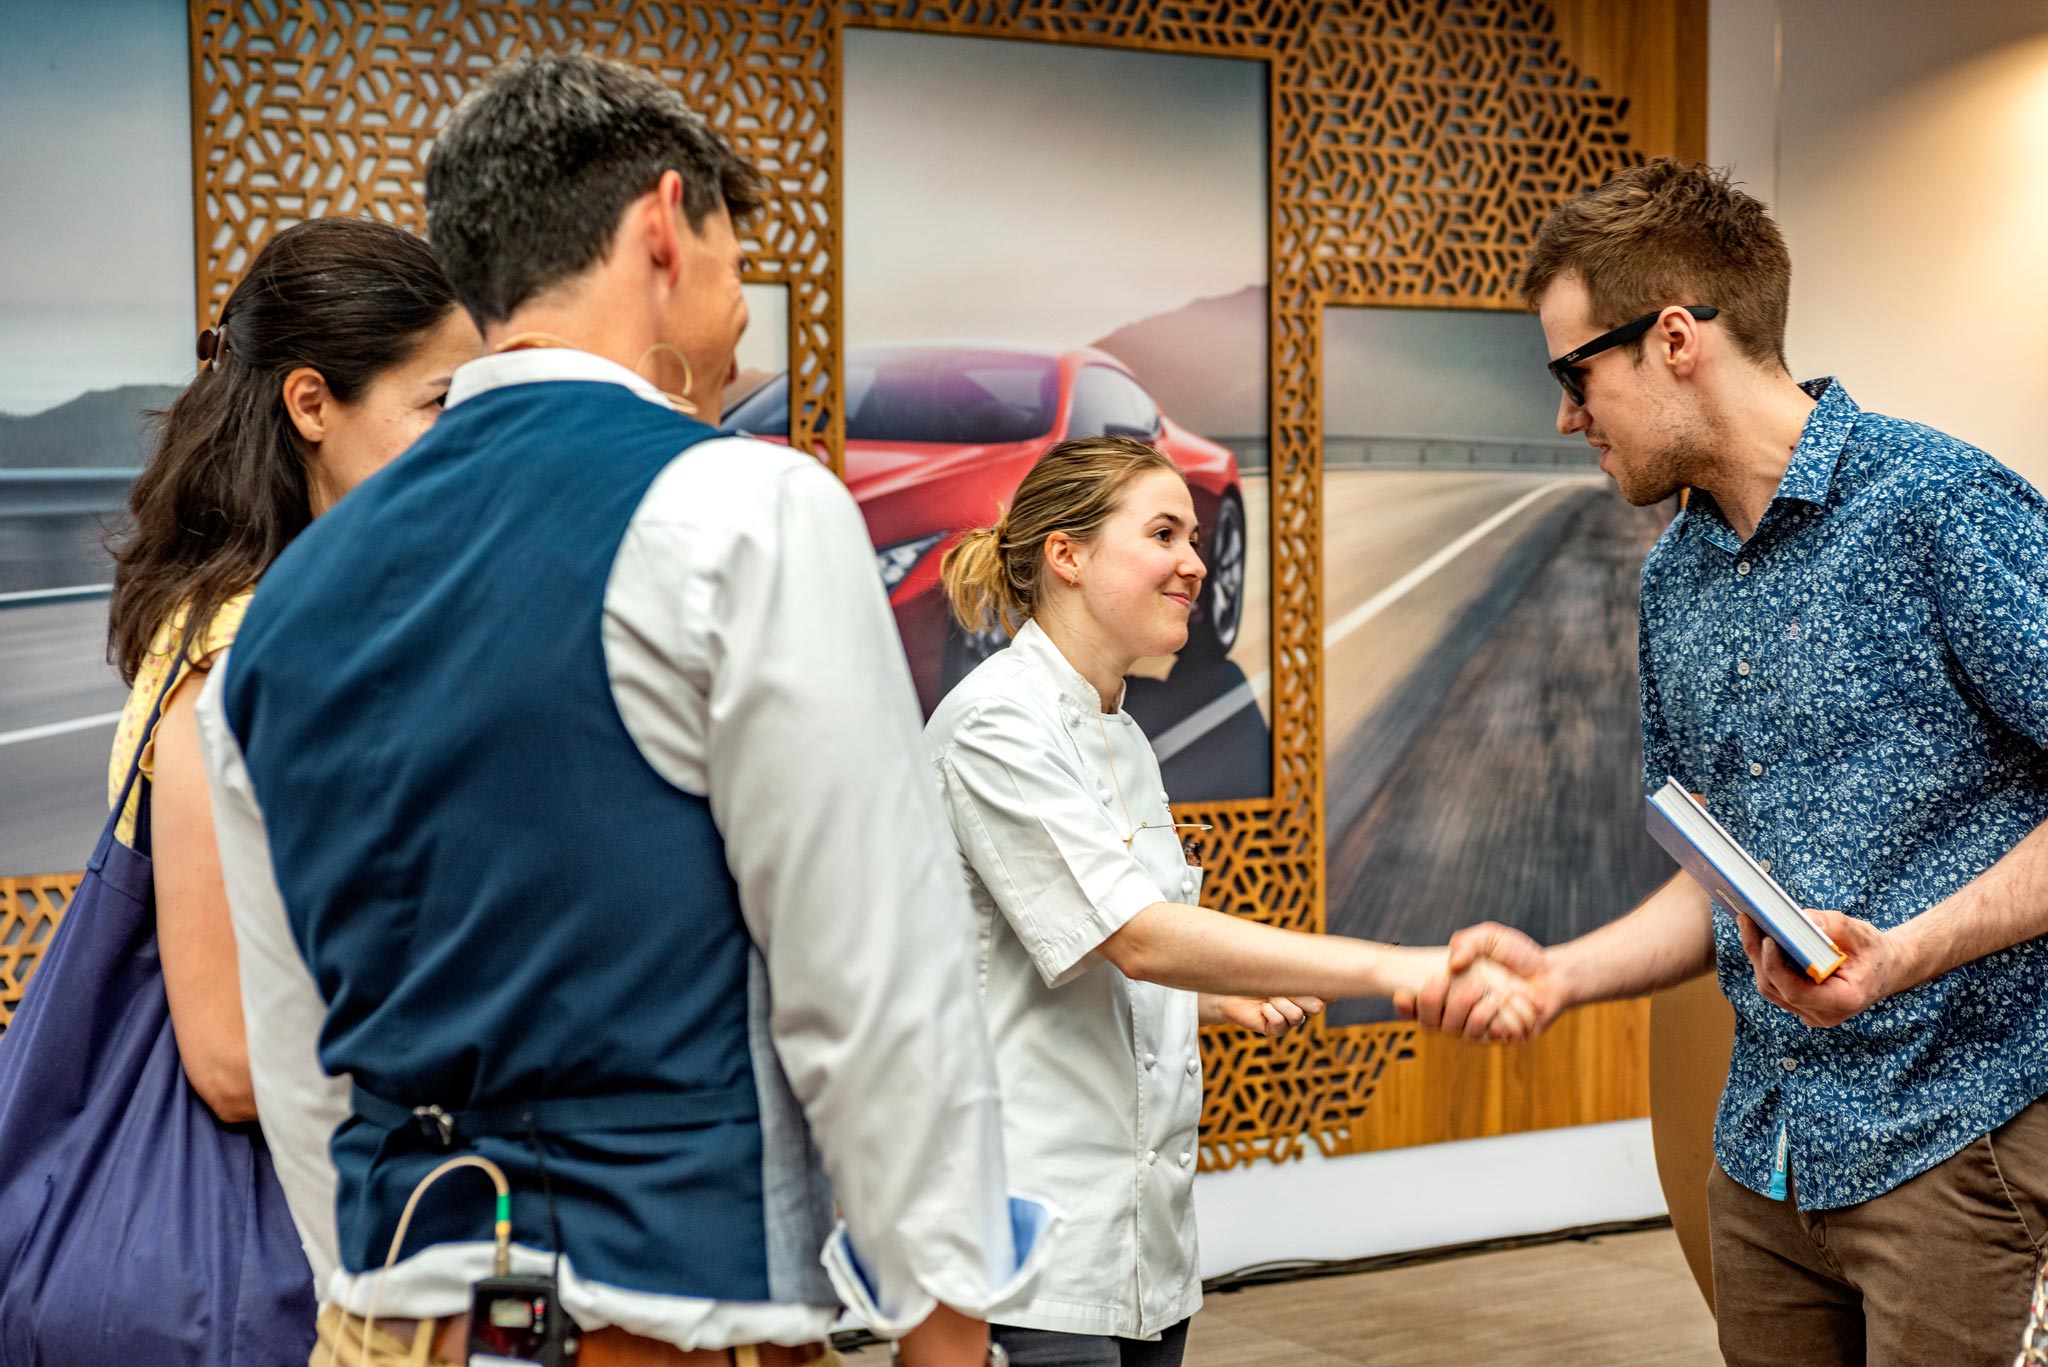 Emily Roux, the famous chef, hands over a signed copy of her book to a customer at an automotive event for Lexus, captured in a reportage style by Wright Content.